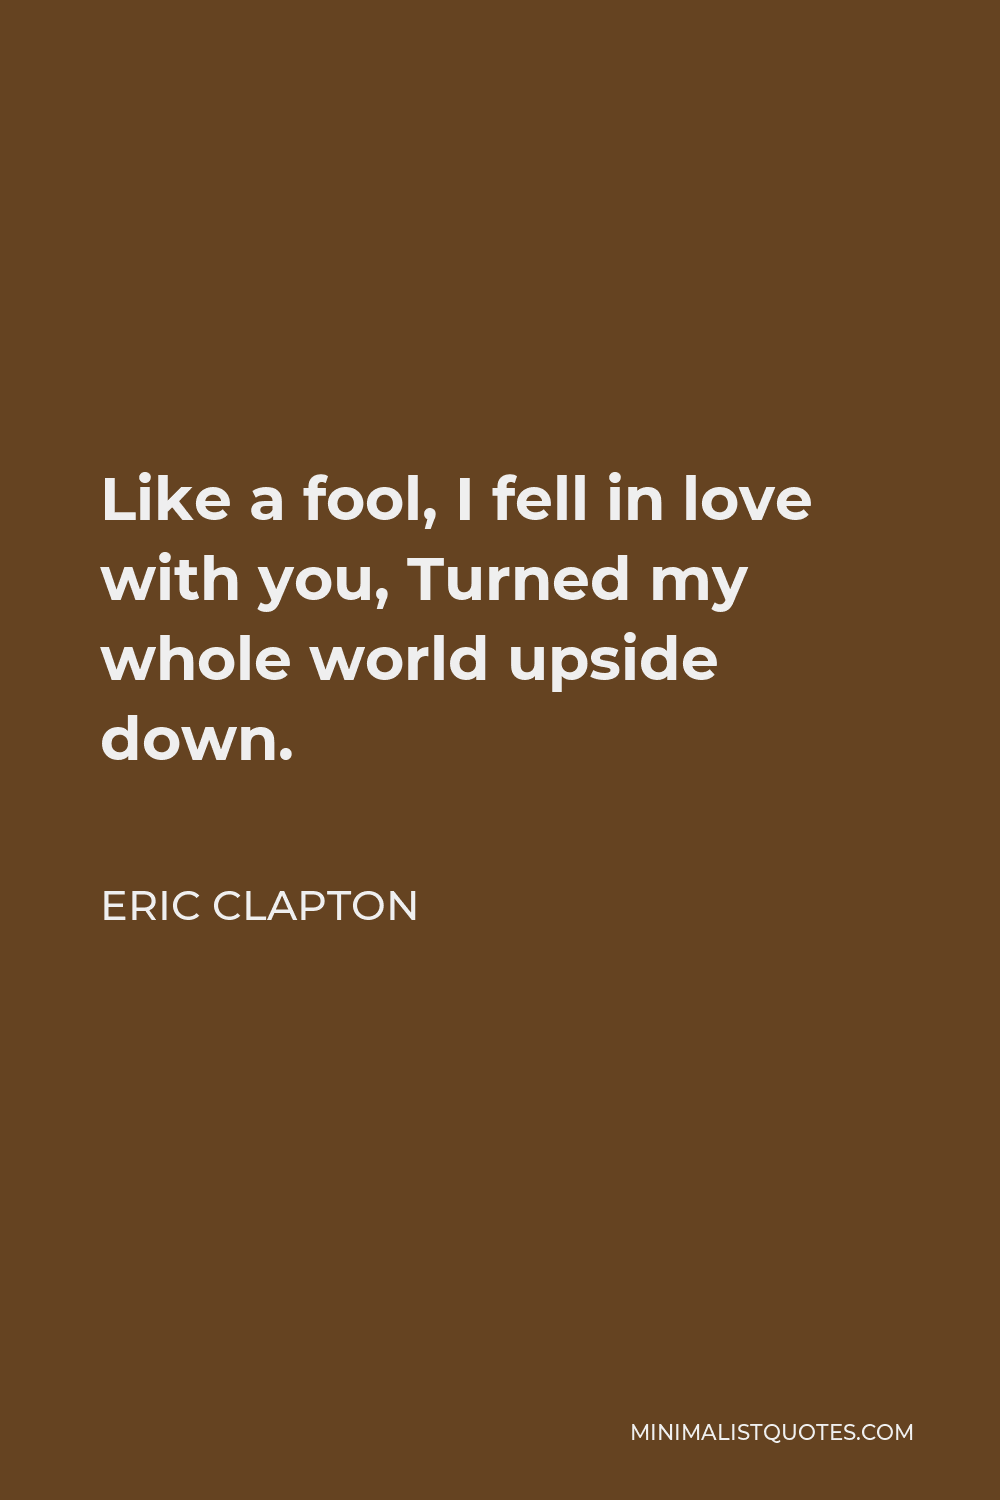 Eric Clapton Quote - Like a fool, I fell in love with you, Turned my whole world upside down.